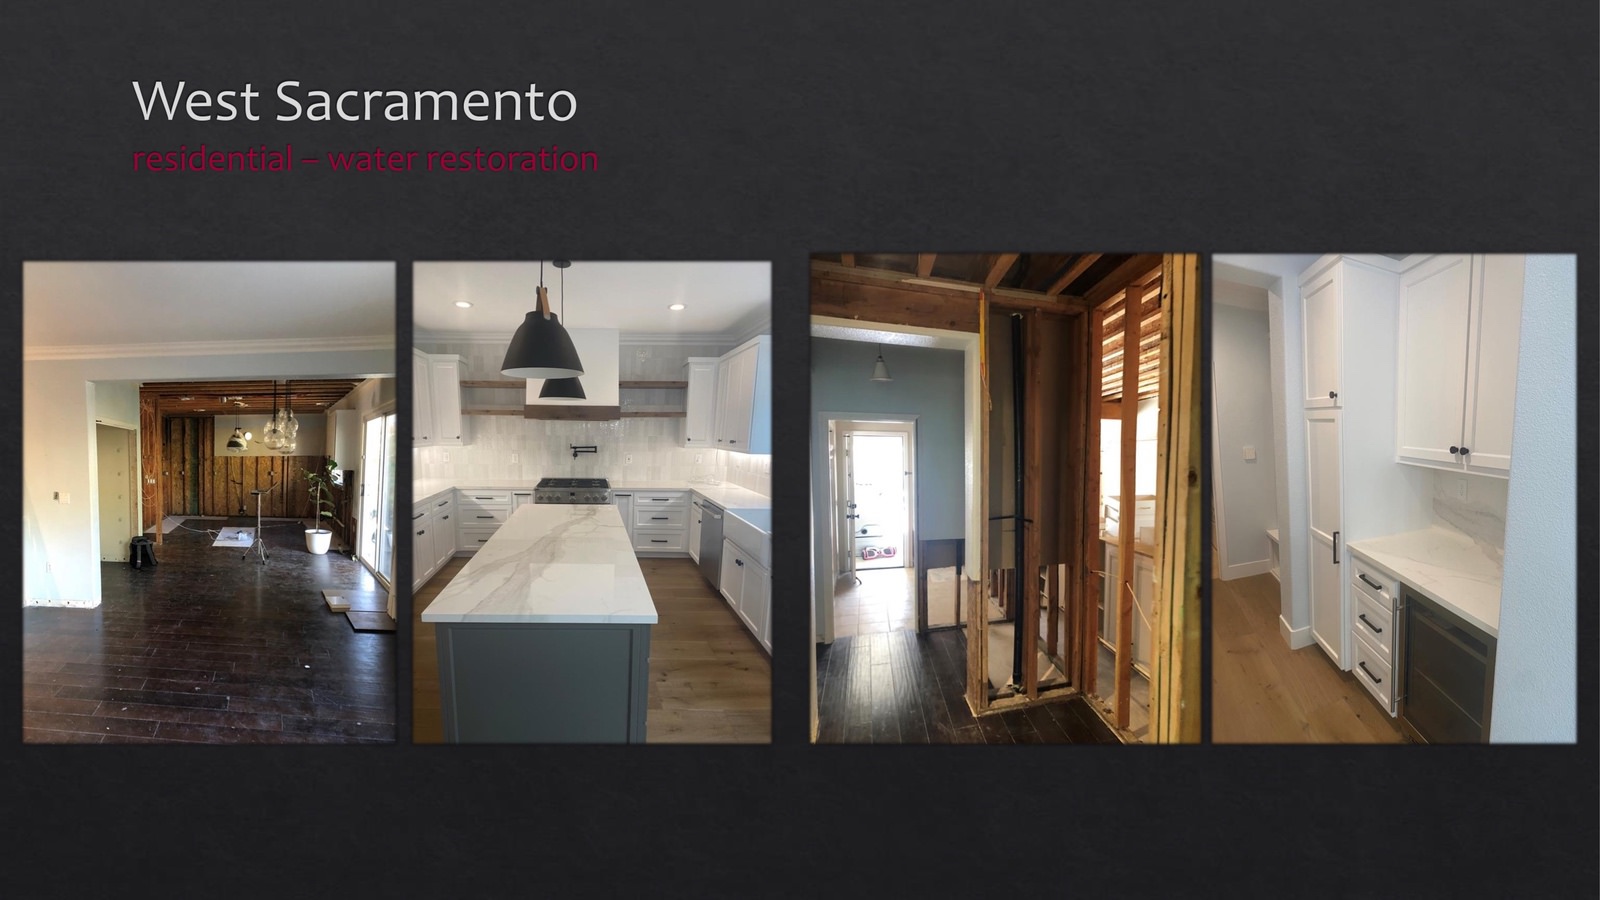 West Sacramento Residential fire restoration - living room and kitchen - lightbox